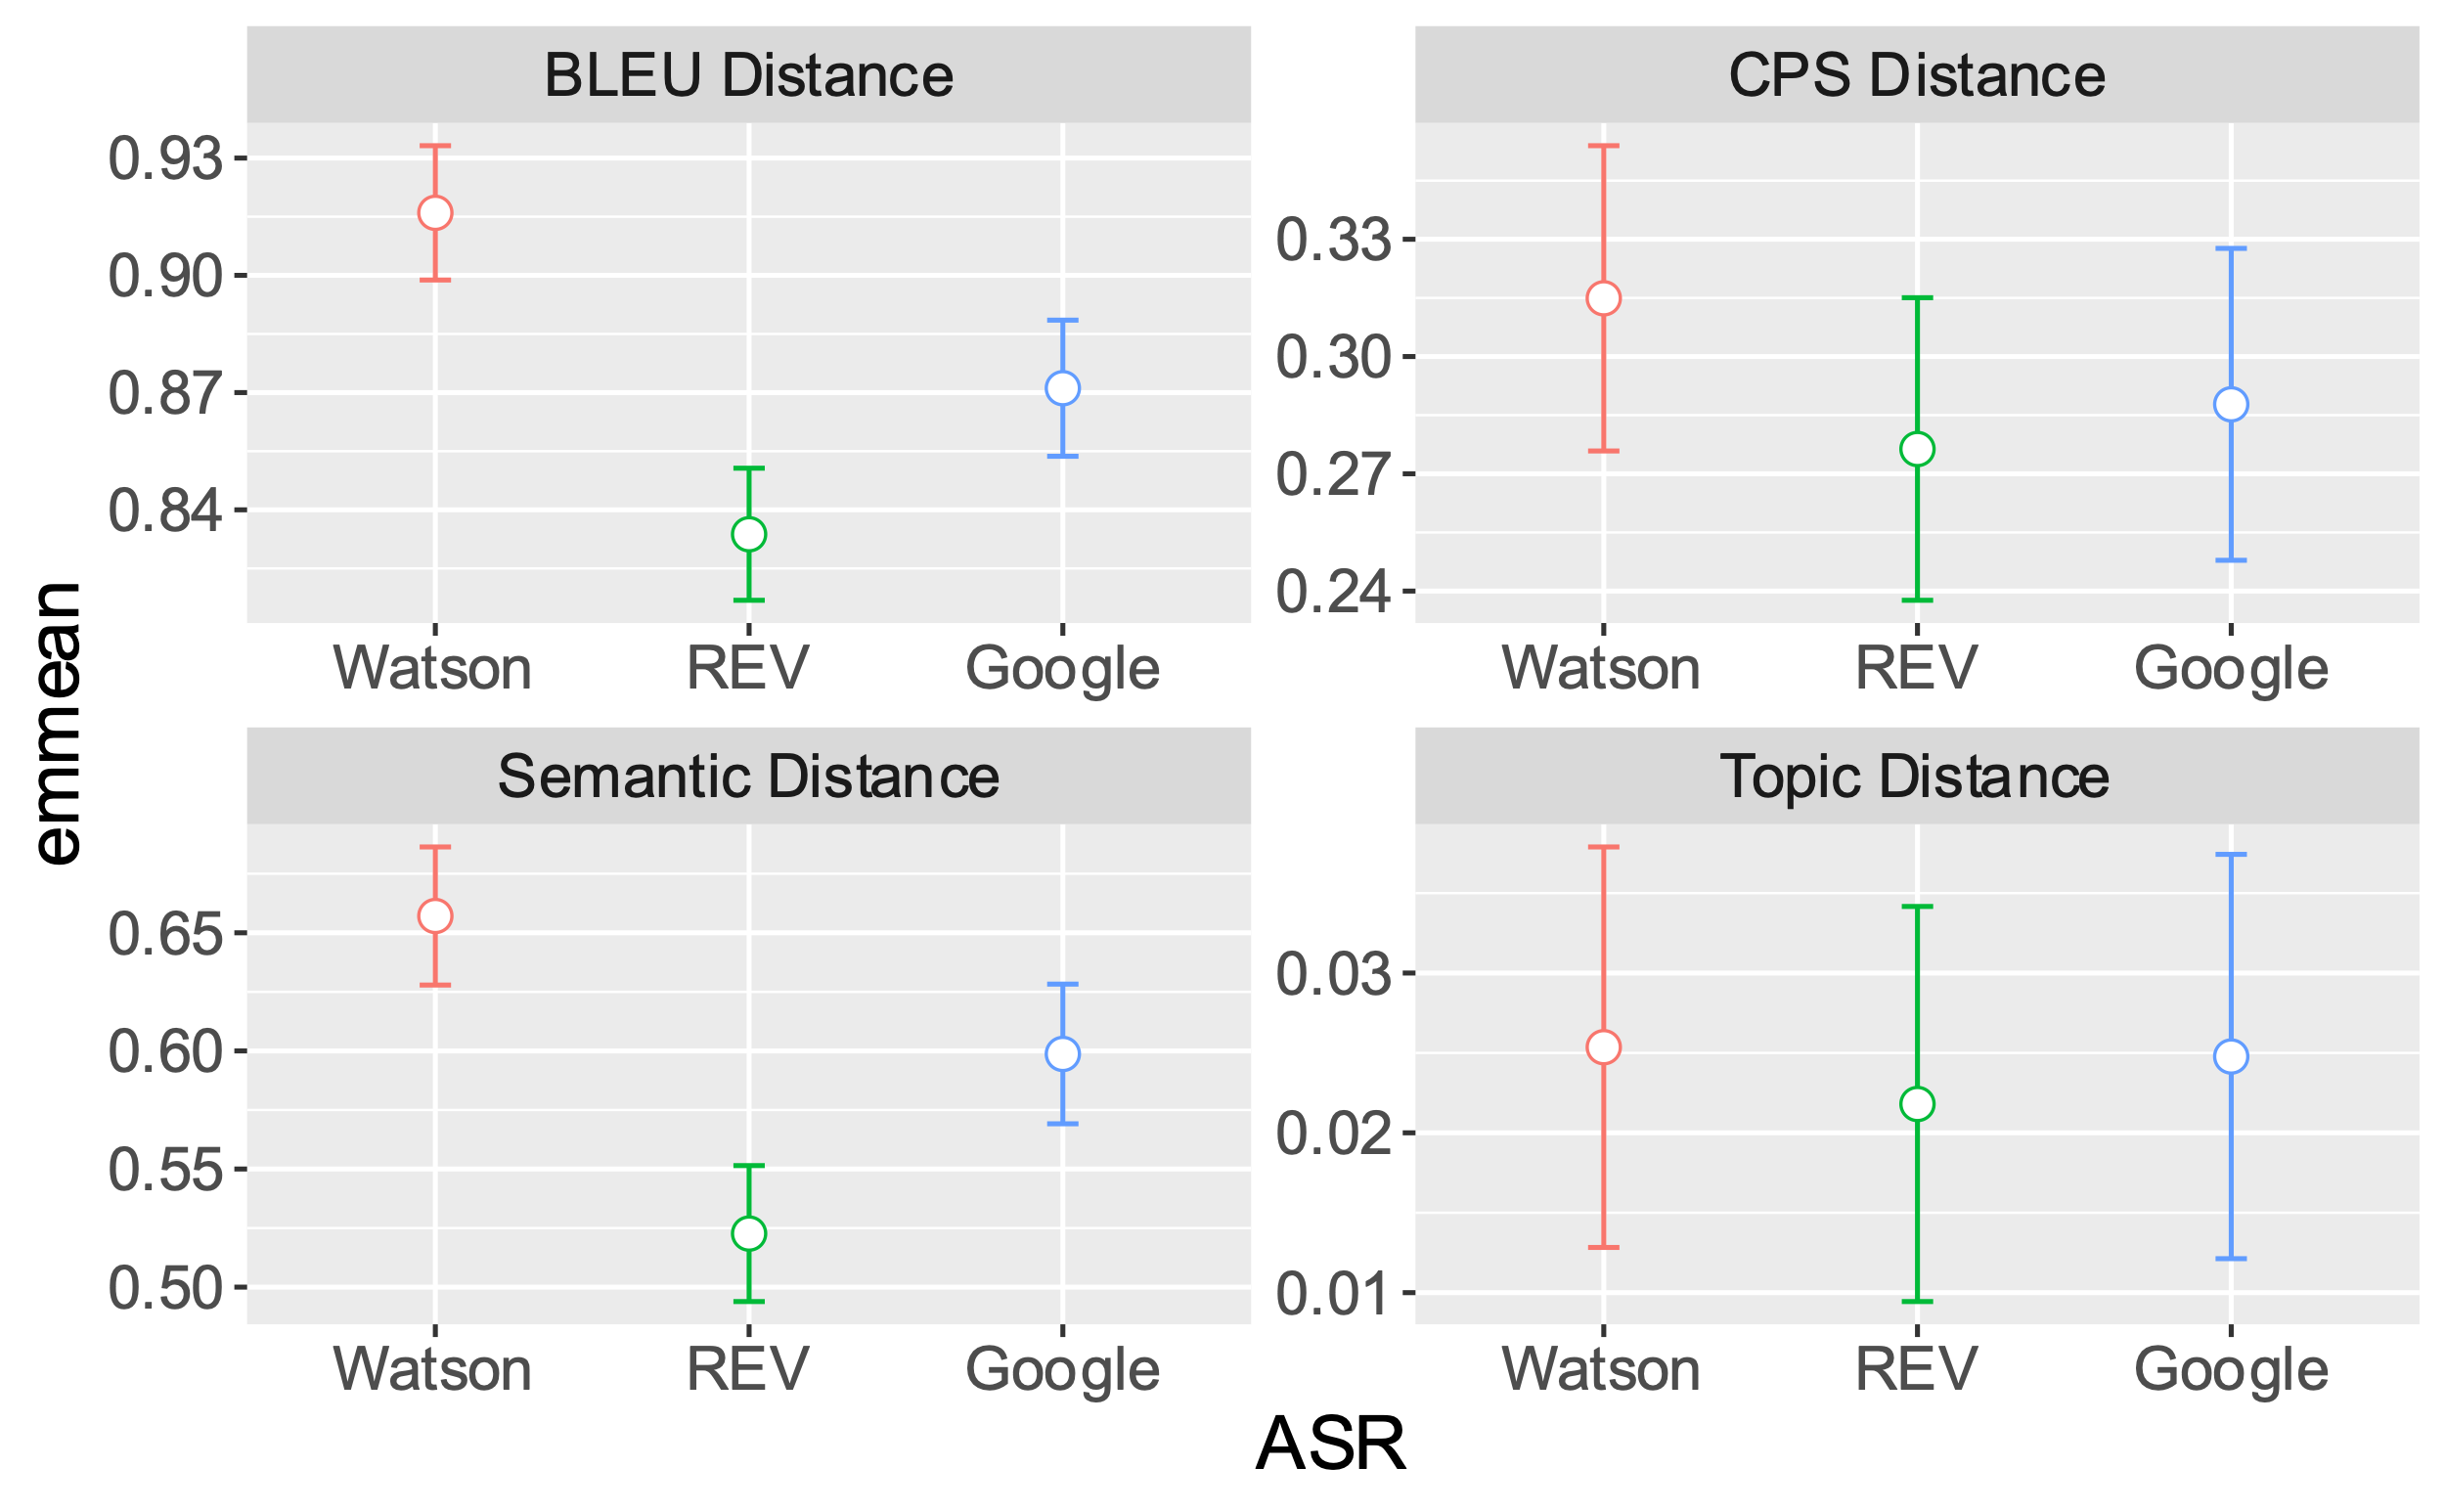 Estimated marginal means and 95% confidence intervals for NLP distance metrics for each of the ASR services